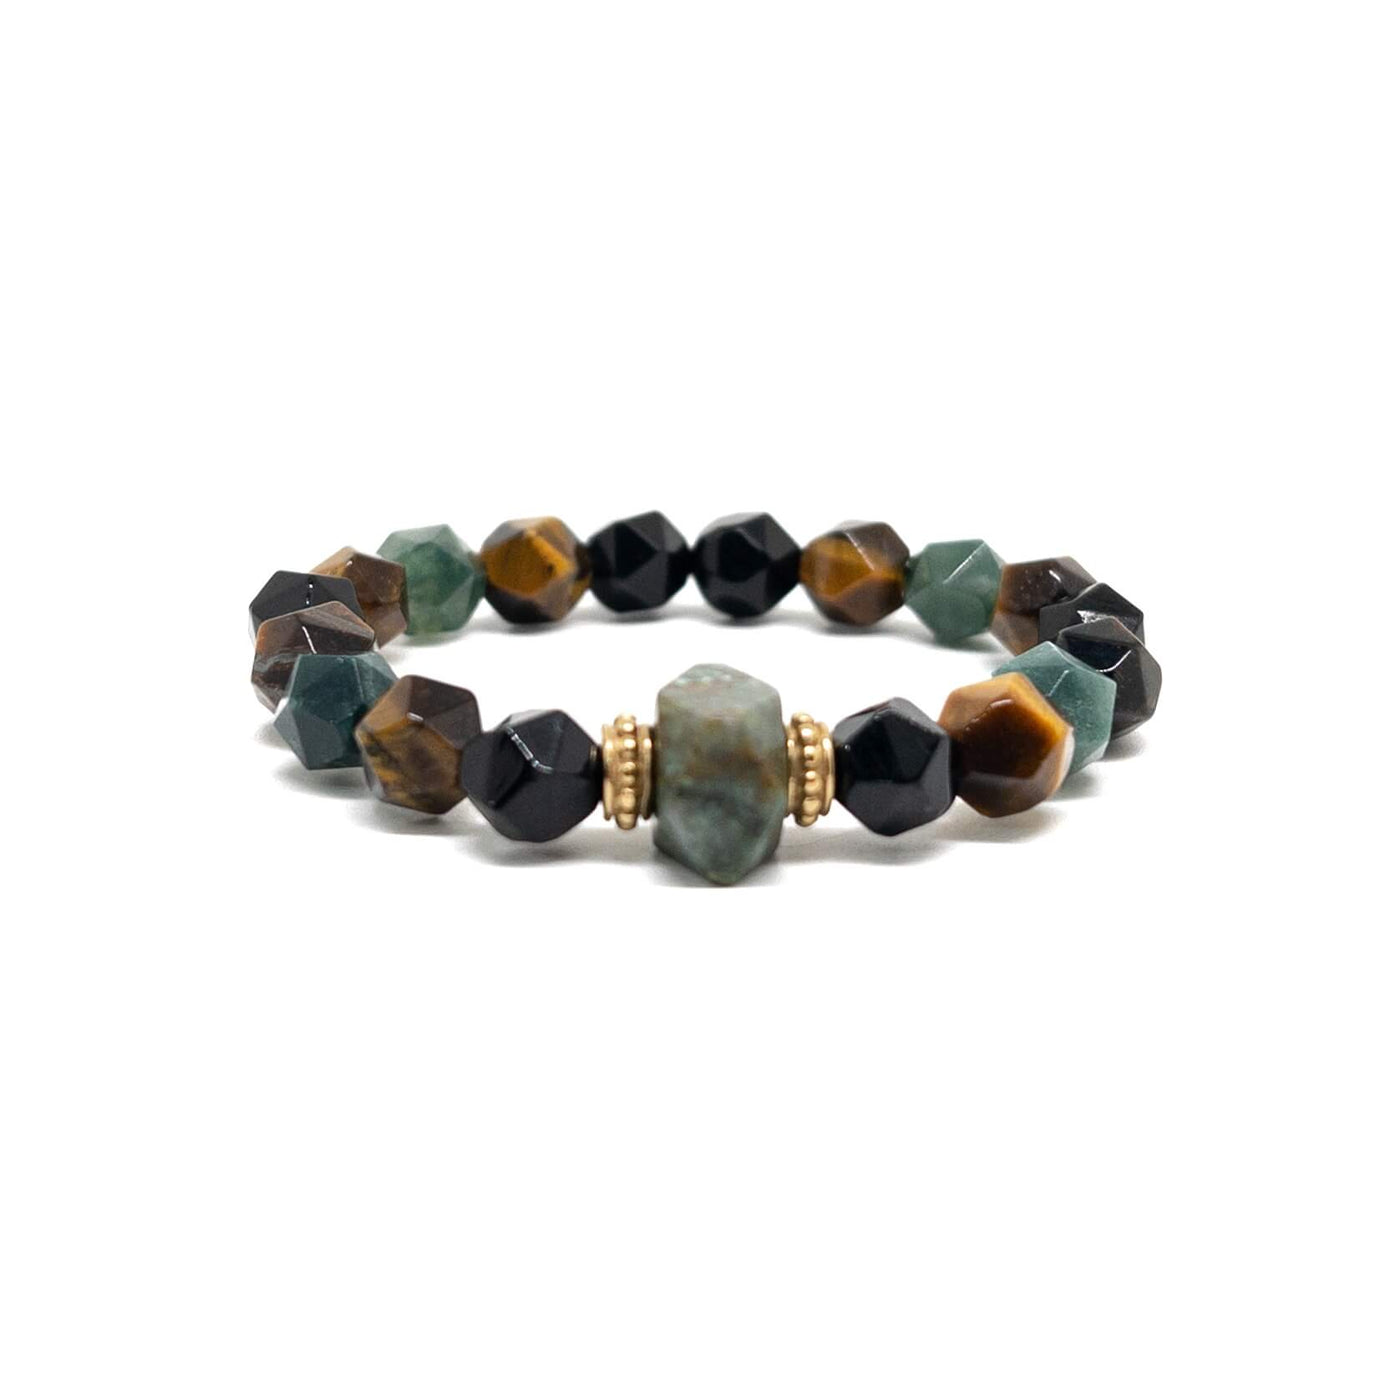 The Full Stone and African turquoise Bracelet